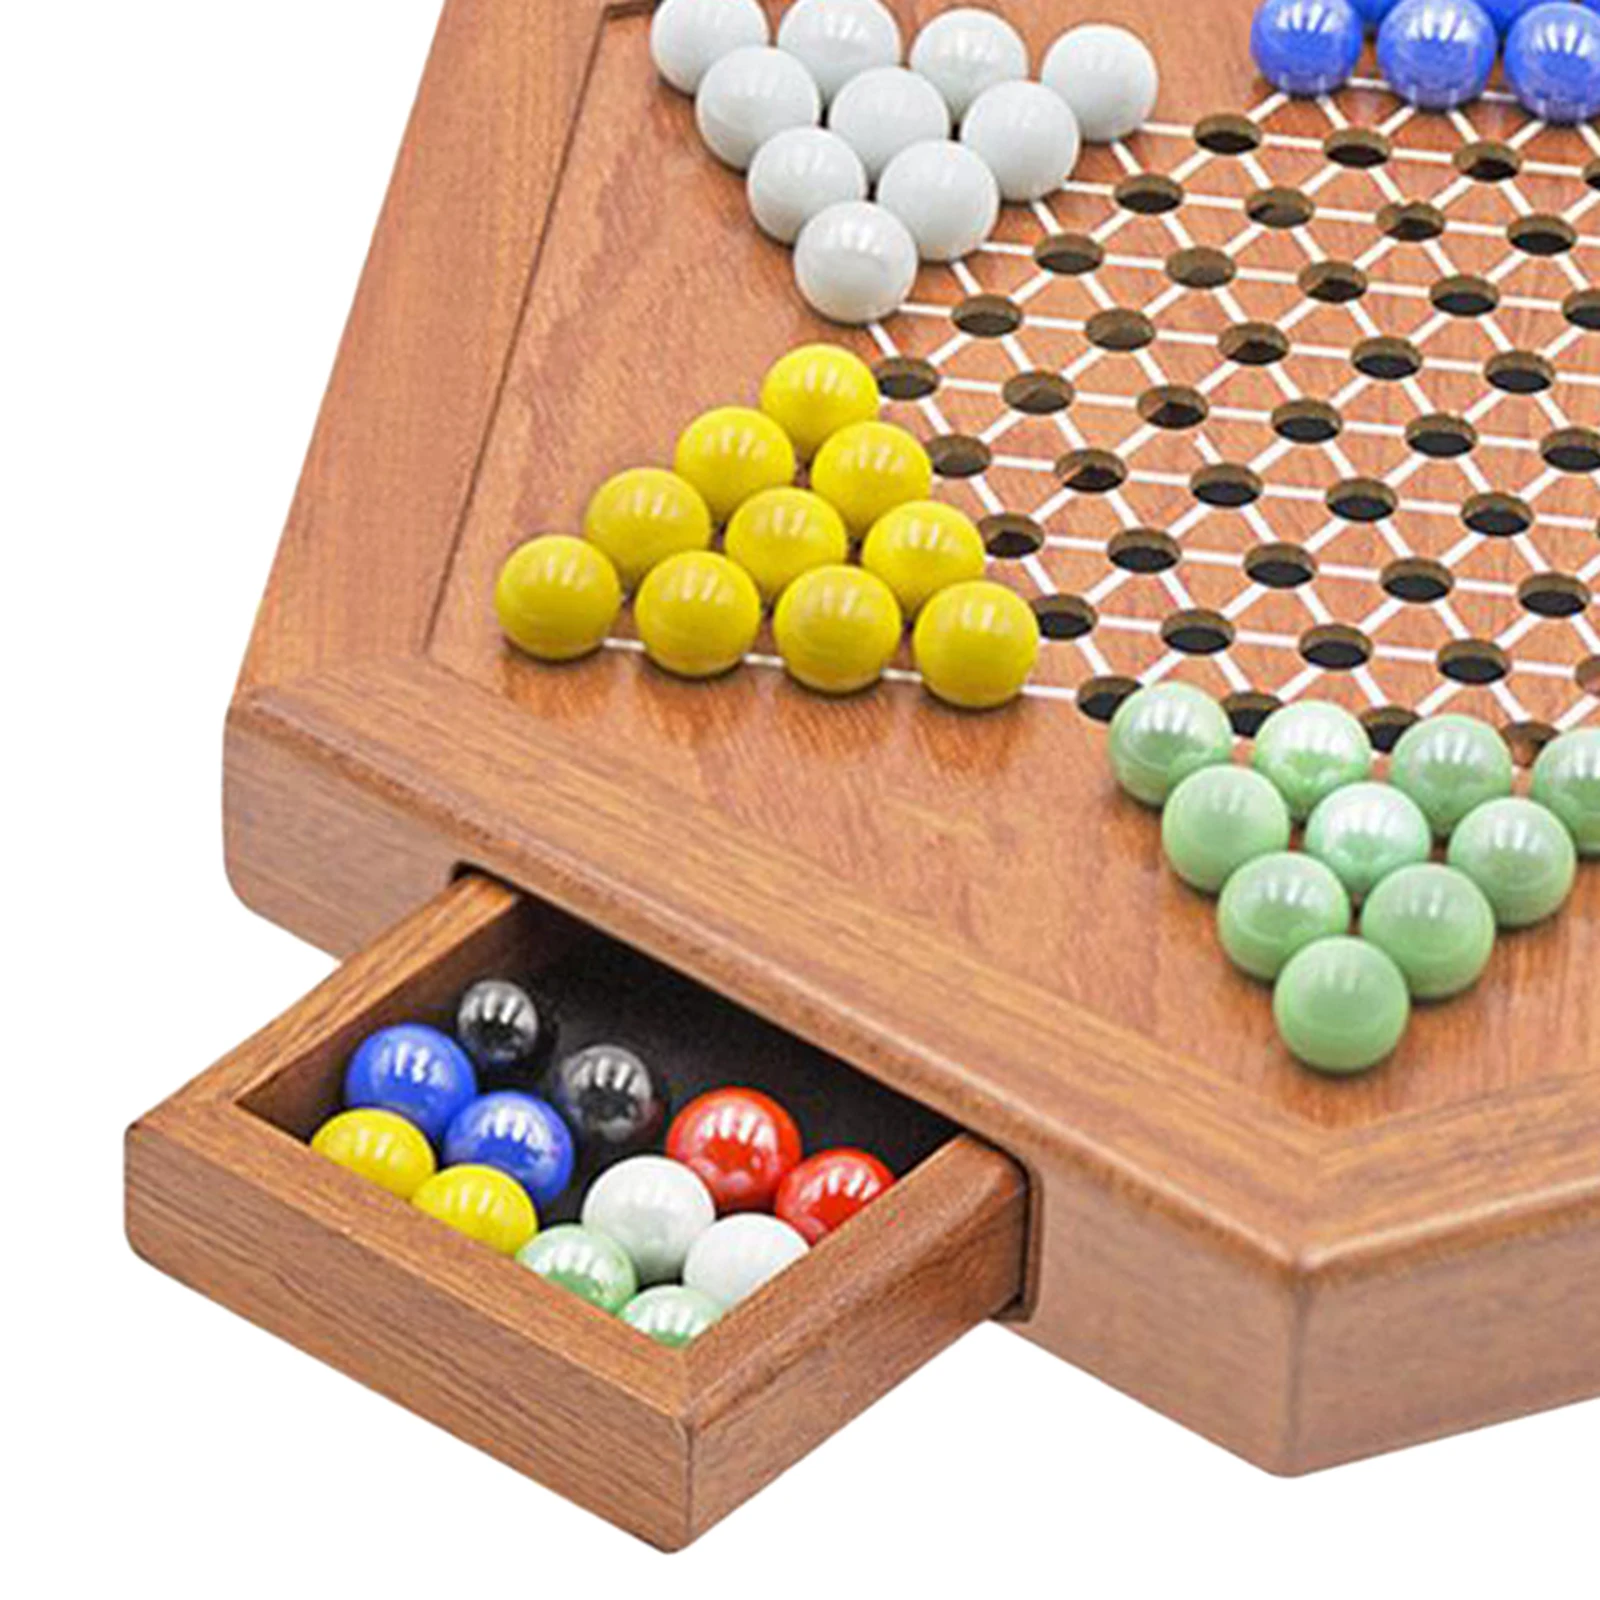 Classic Wooden Chinese Checkers 12 Inches with Drawers Halma Board Game Fine Glass Beads Family Multiplayer